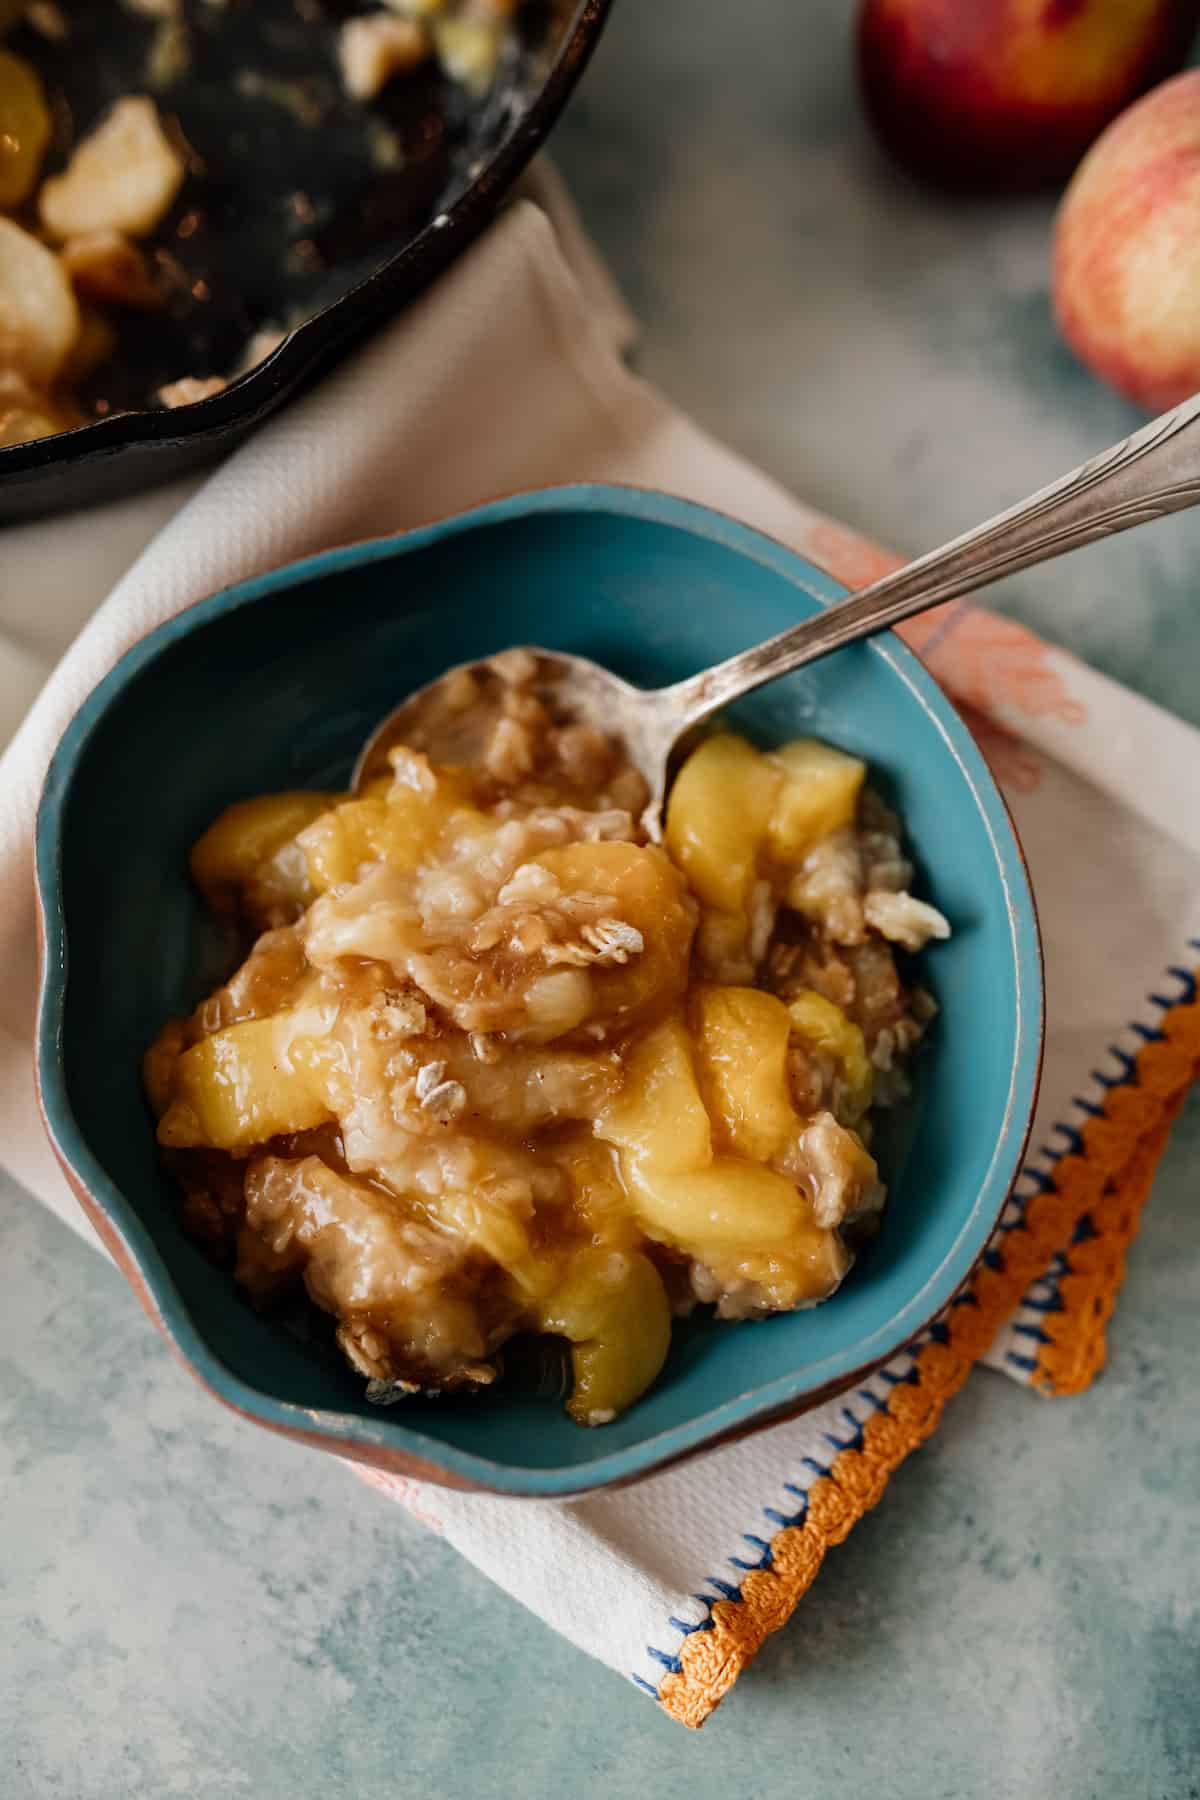 baked peach crisp in a turquoise bowl on an embroidered napkin with a spoon